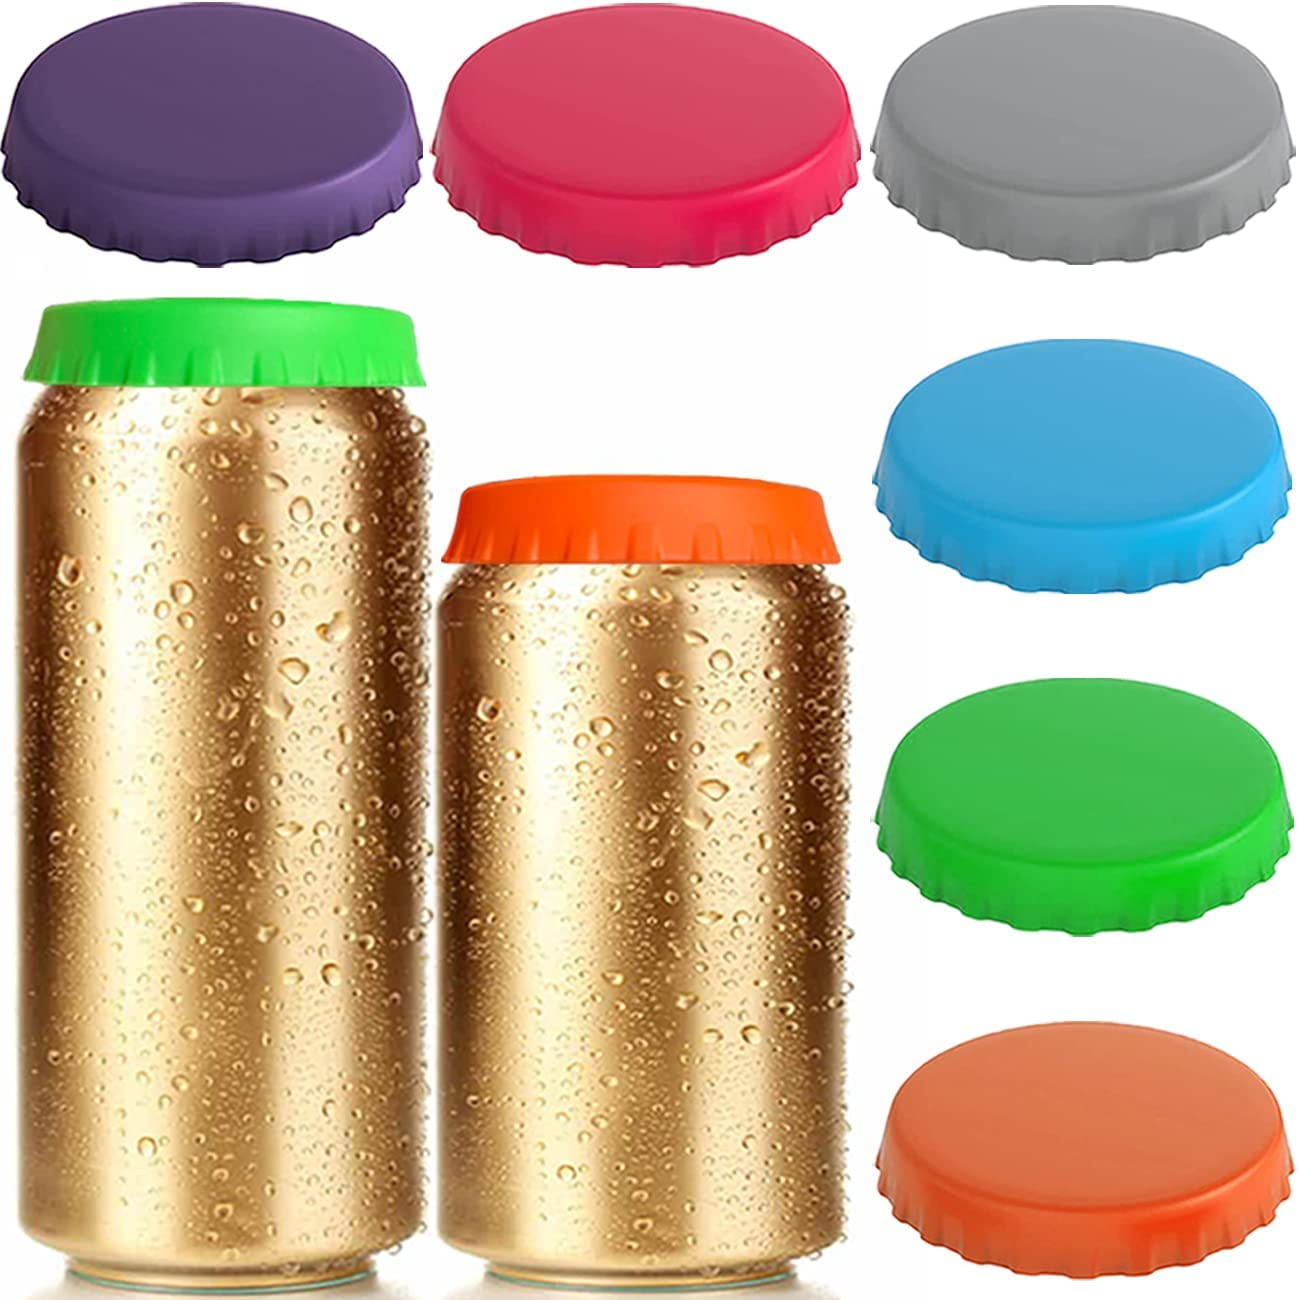 Silicone Soda Can Lids, Pack Reusable Soda/Beverage/Beer Can Lids, Can Covers, Can Can Topper, Can Saver, Can Stopper, Cans Can Cover or Protector, Fits Standard Soda Cans (Assorted) -